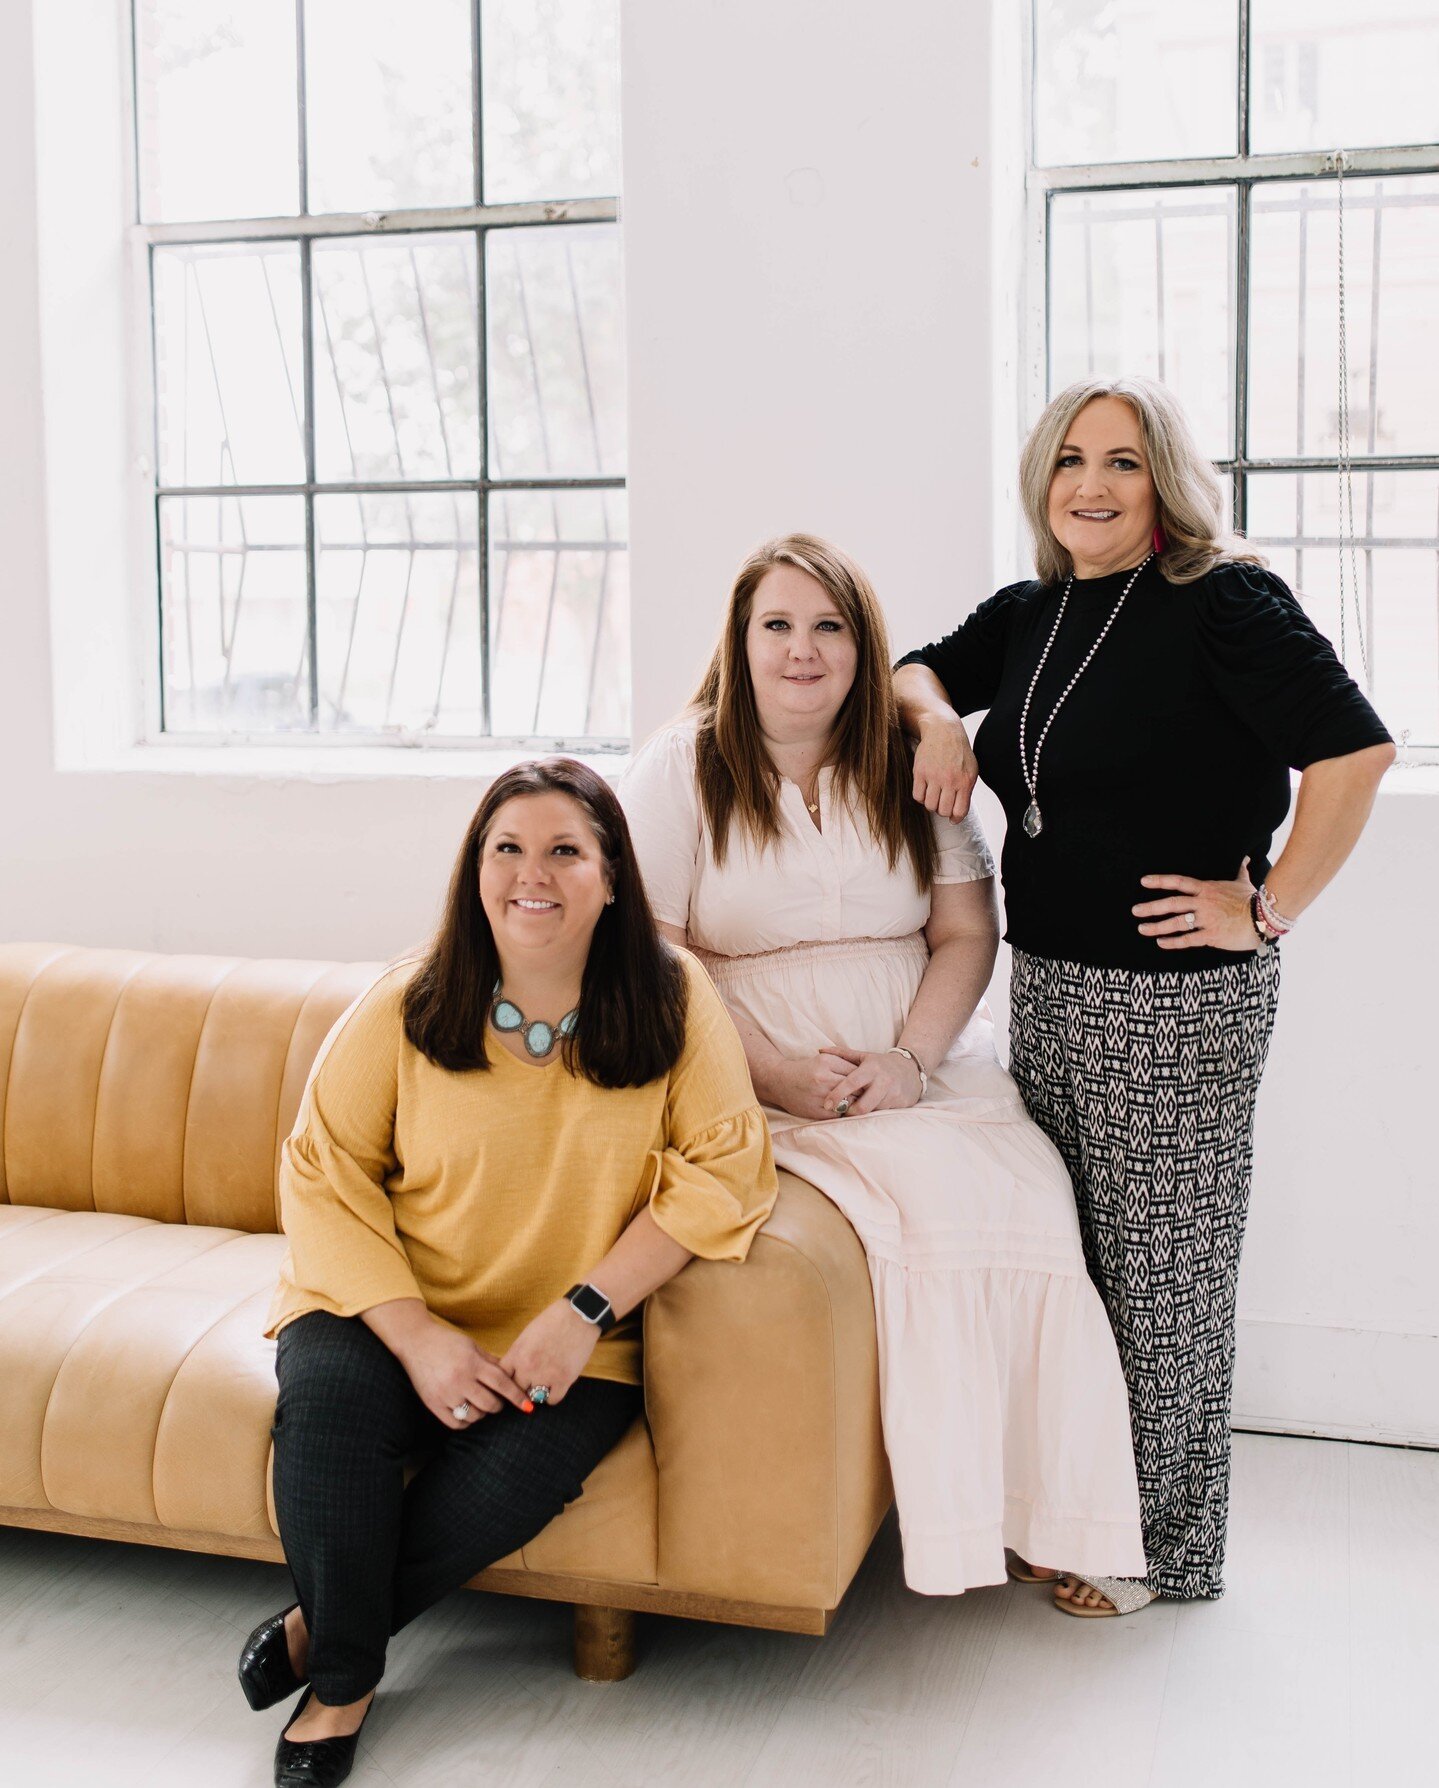 Your dream house deserves a dream closing team 💪

If you own a home, you probably remember how impersonal, confusing and rushed the closing process was.

Kim, Kat, and Amanda create a better experience for clients while handling the legal aspects of